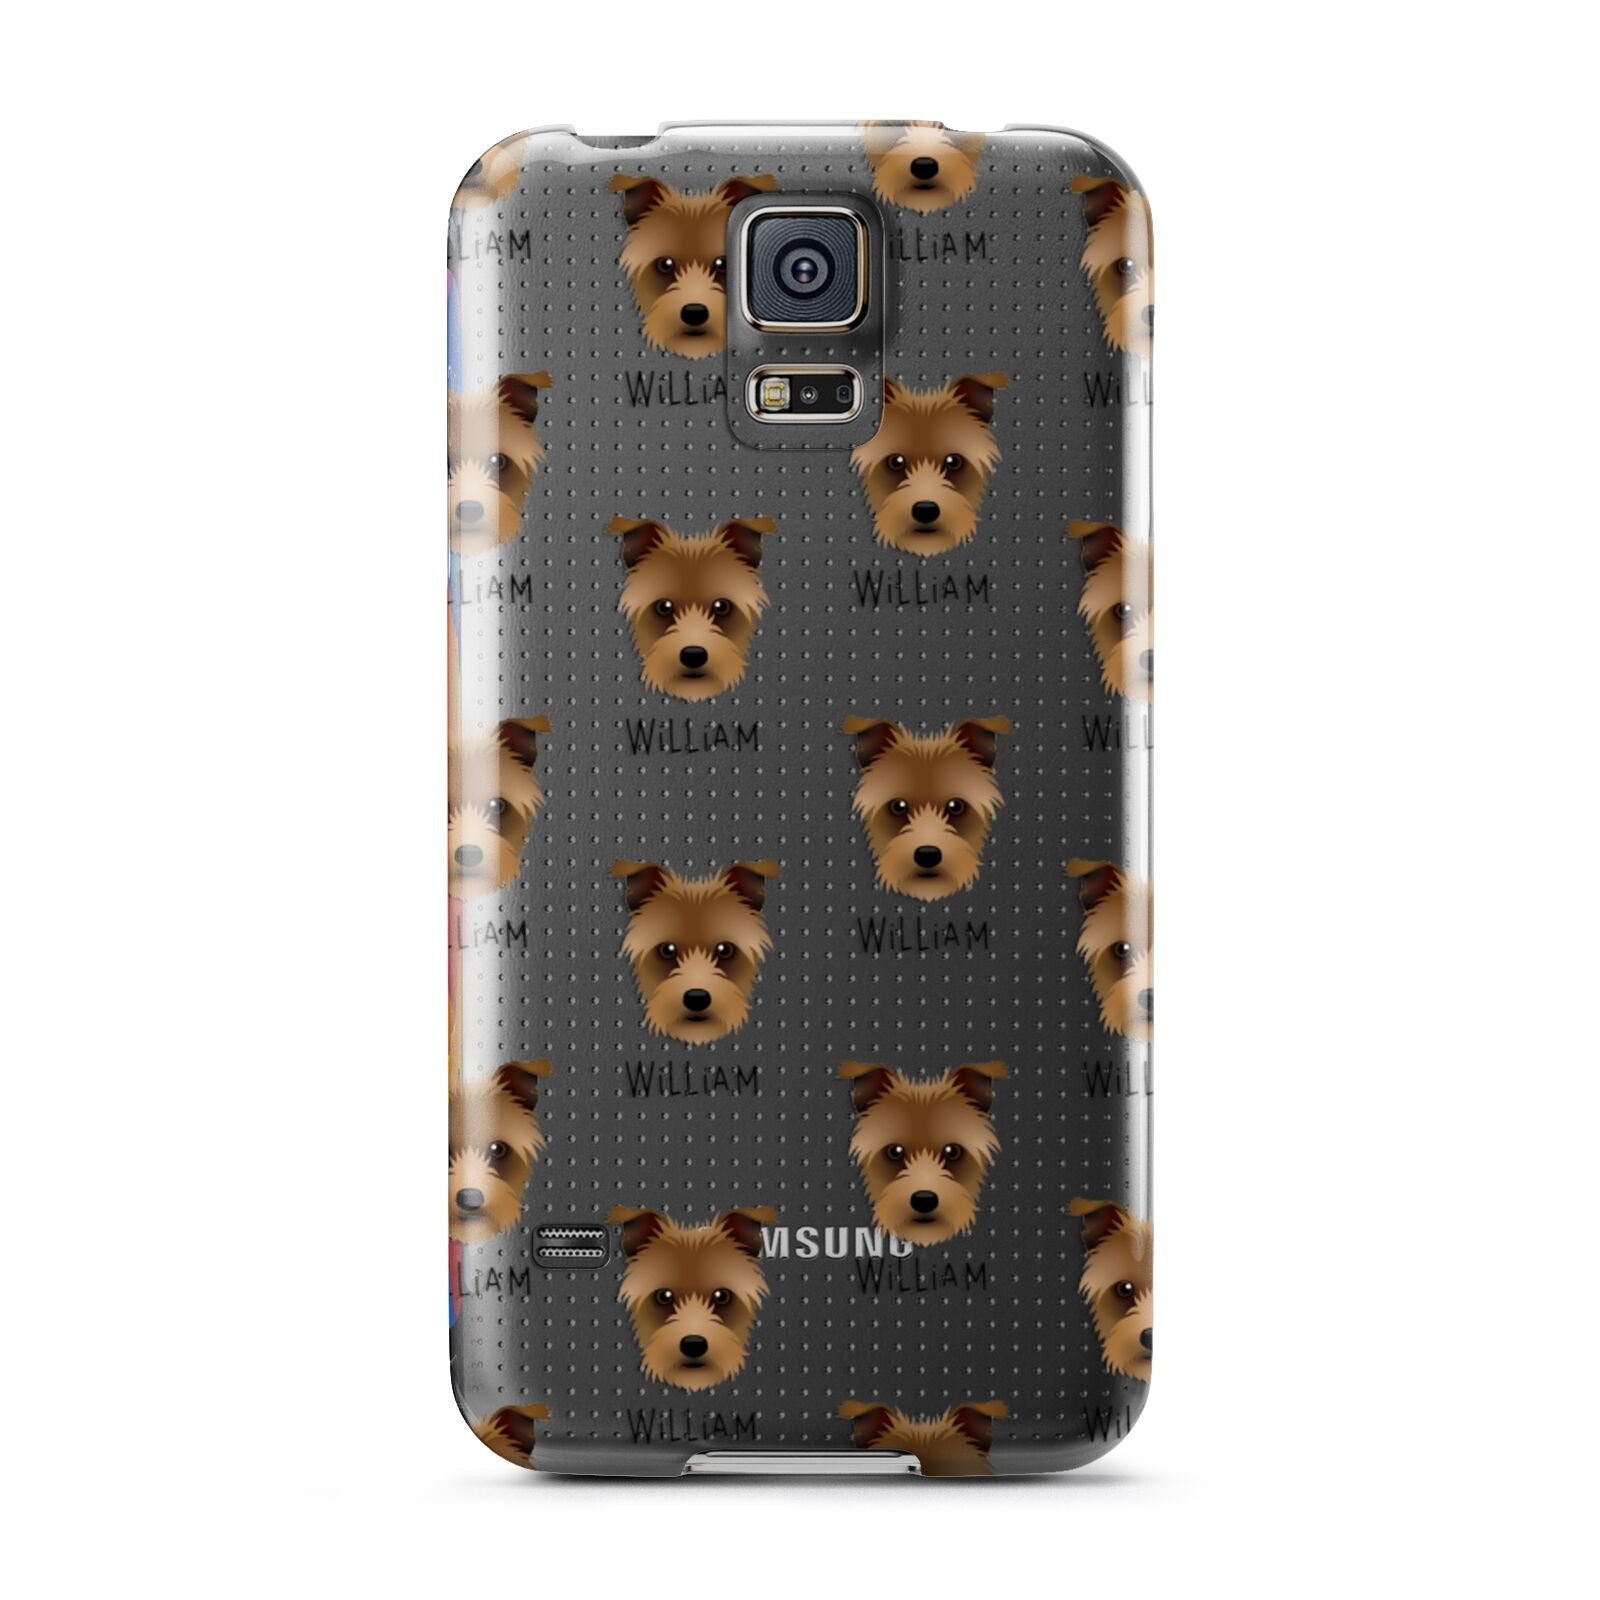 Sporting Lucas Terrier Icon with Name Samsung Galaxy S5 Case